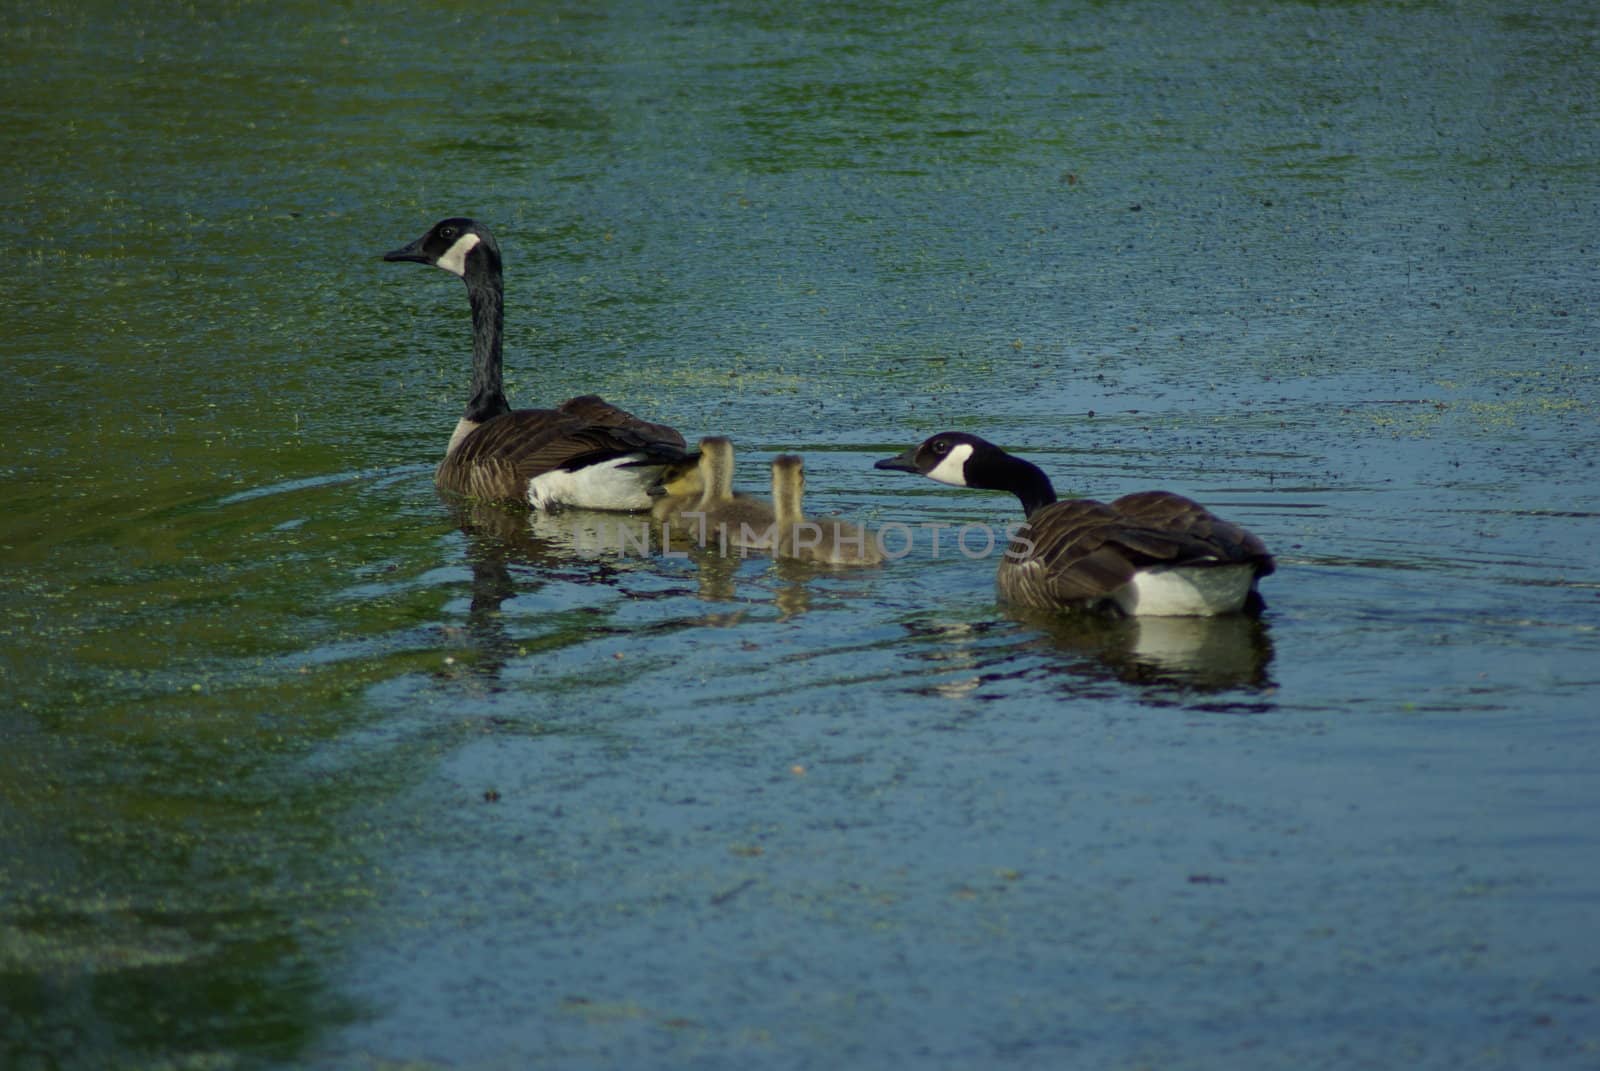 Canadian geese by pelt69